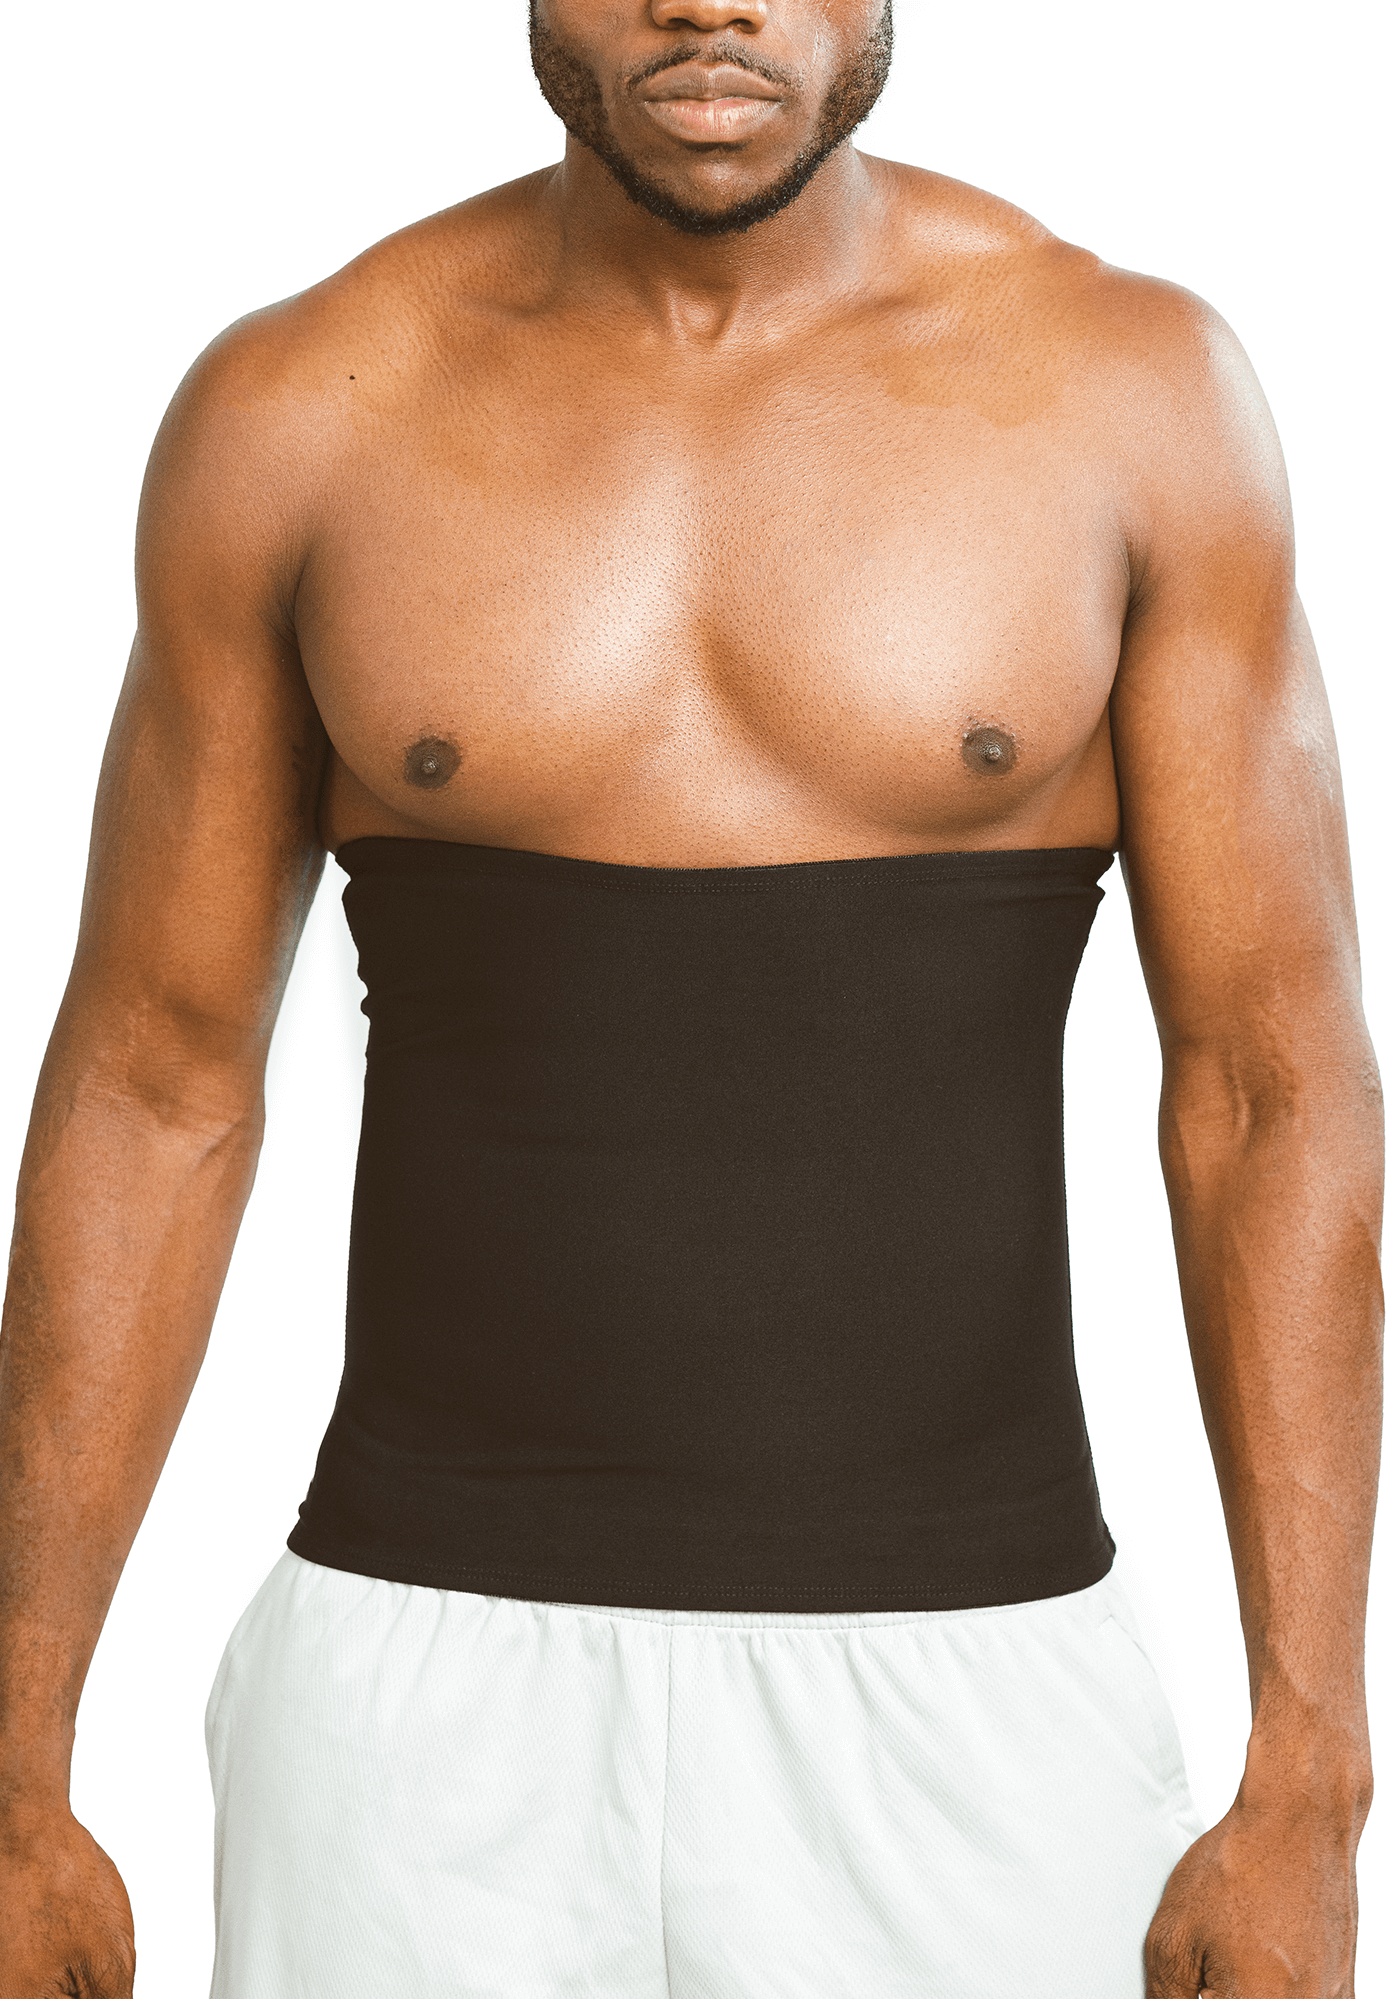  AMY COULEE Sweat Waist Trainer for Men Tummy Control